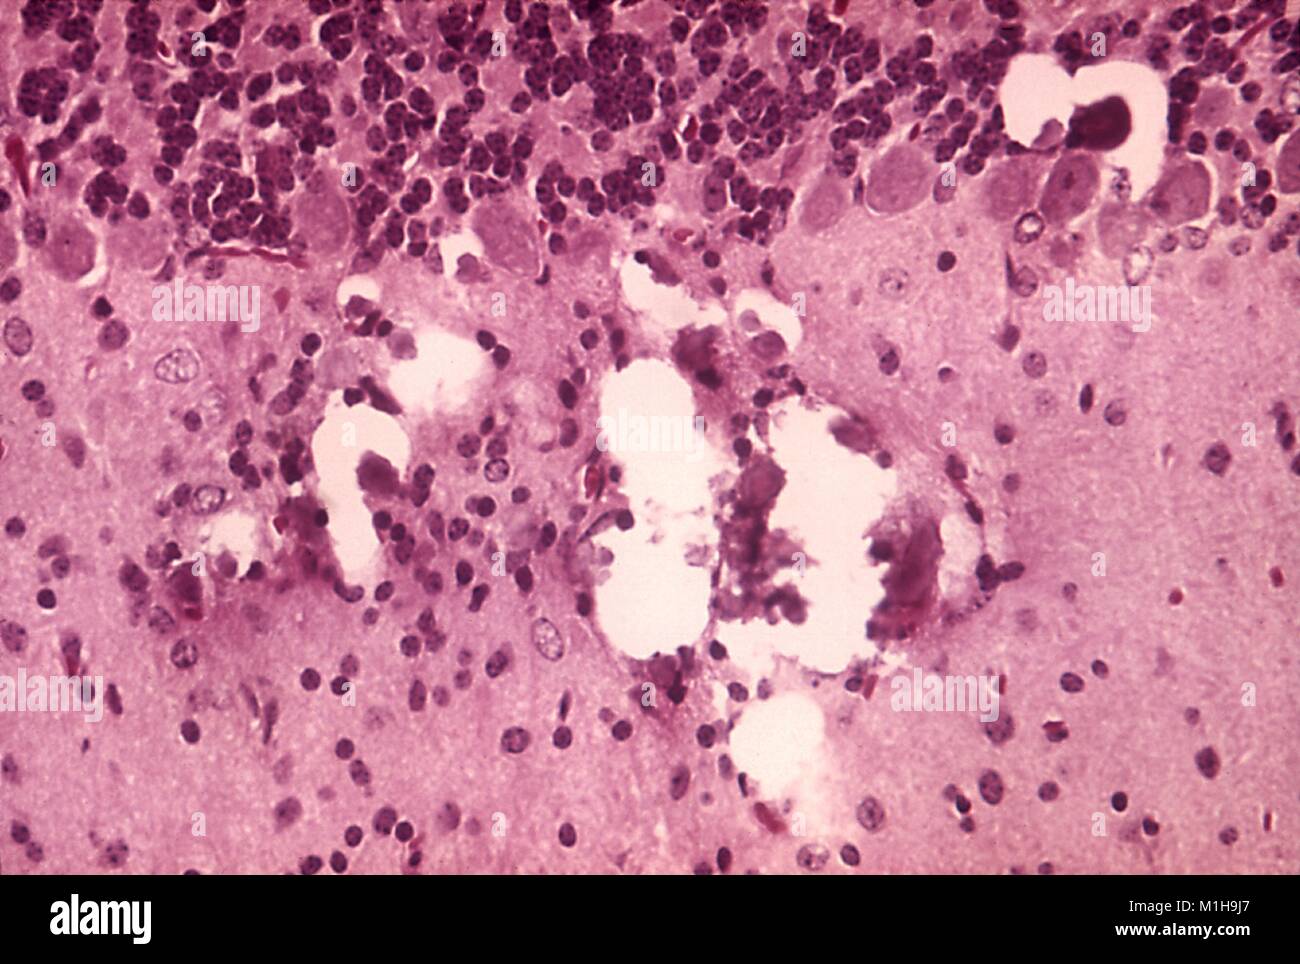 Histopathologic changes found in Tamiami virus encephalitis revealed in a micrograph film, 1972. Image courtesy Centers for Disease Control (CDC) / Dr W Winn. () Stock Photo